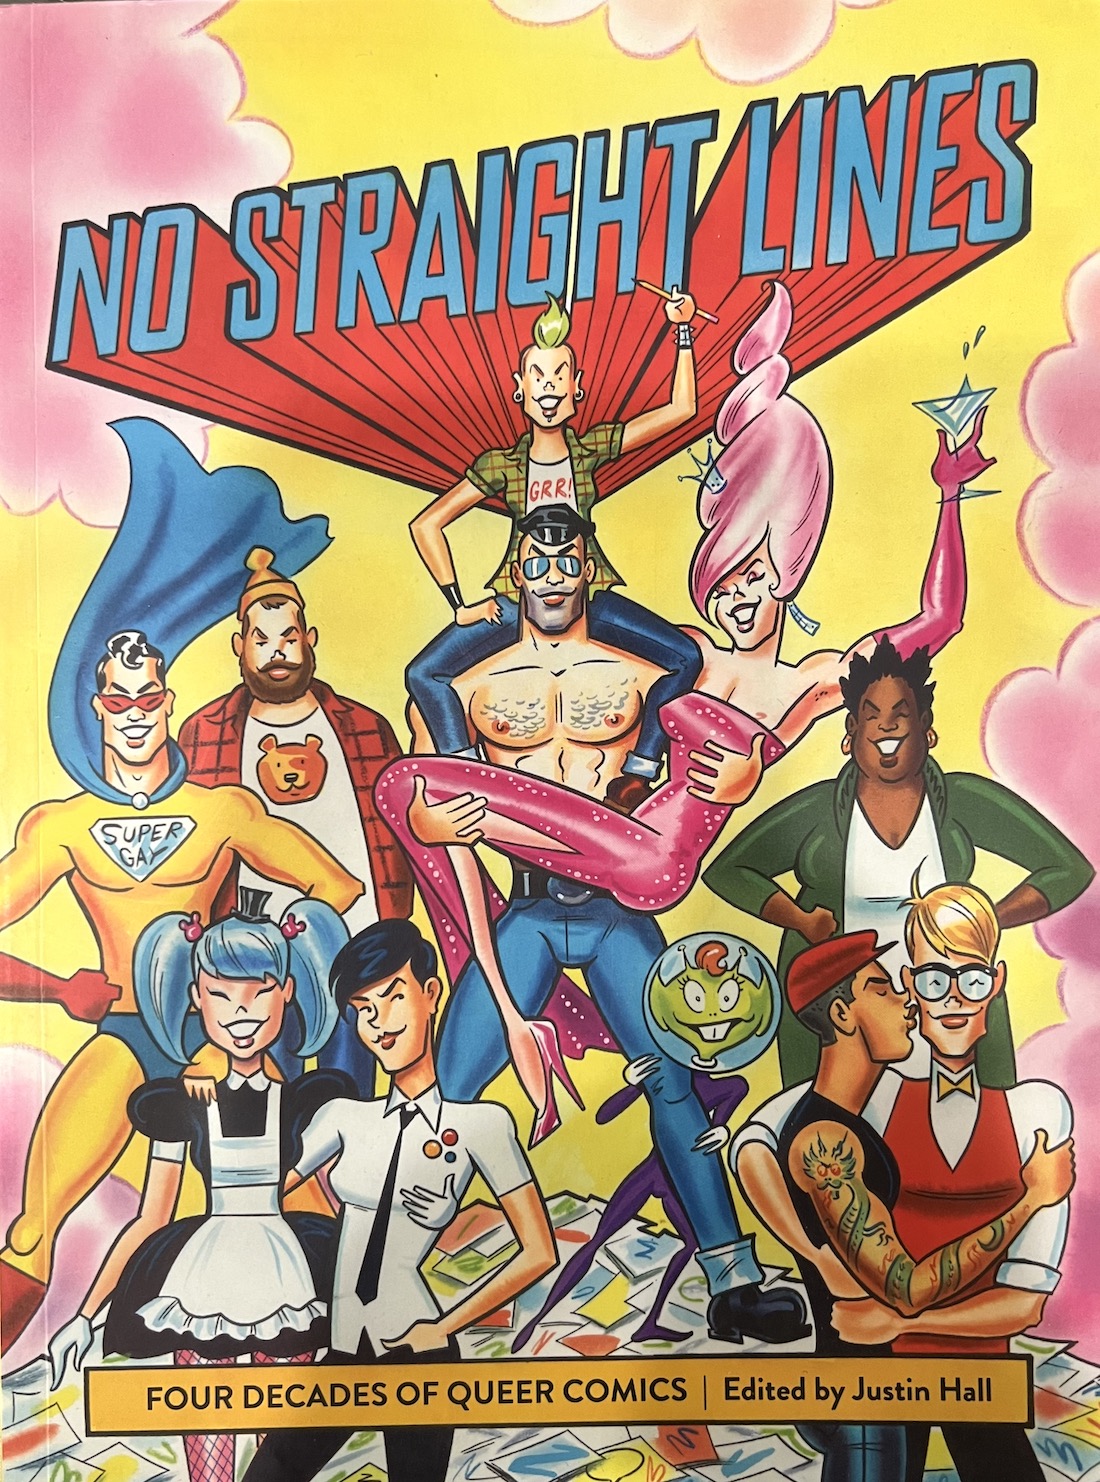 Cover of the comics anthology No Straight Lines